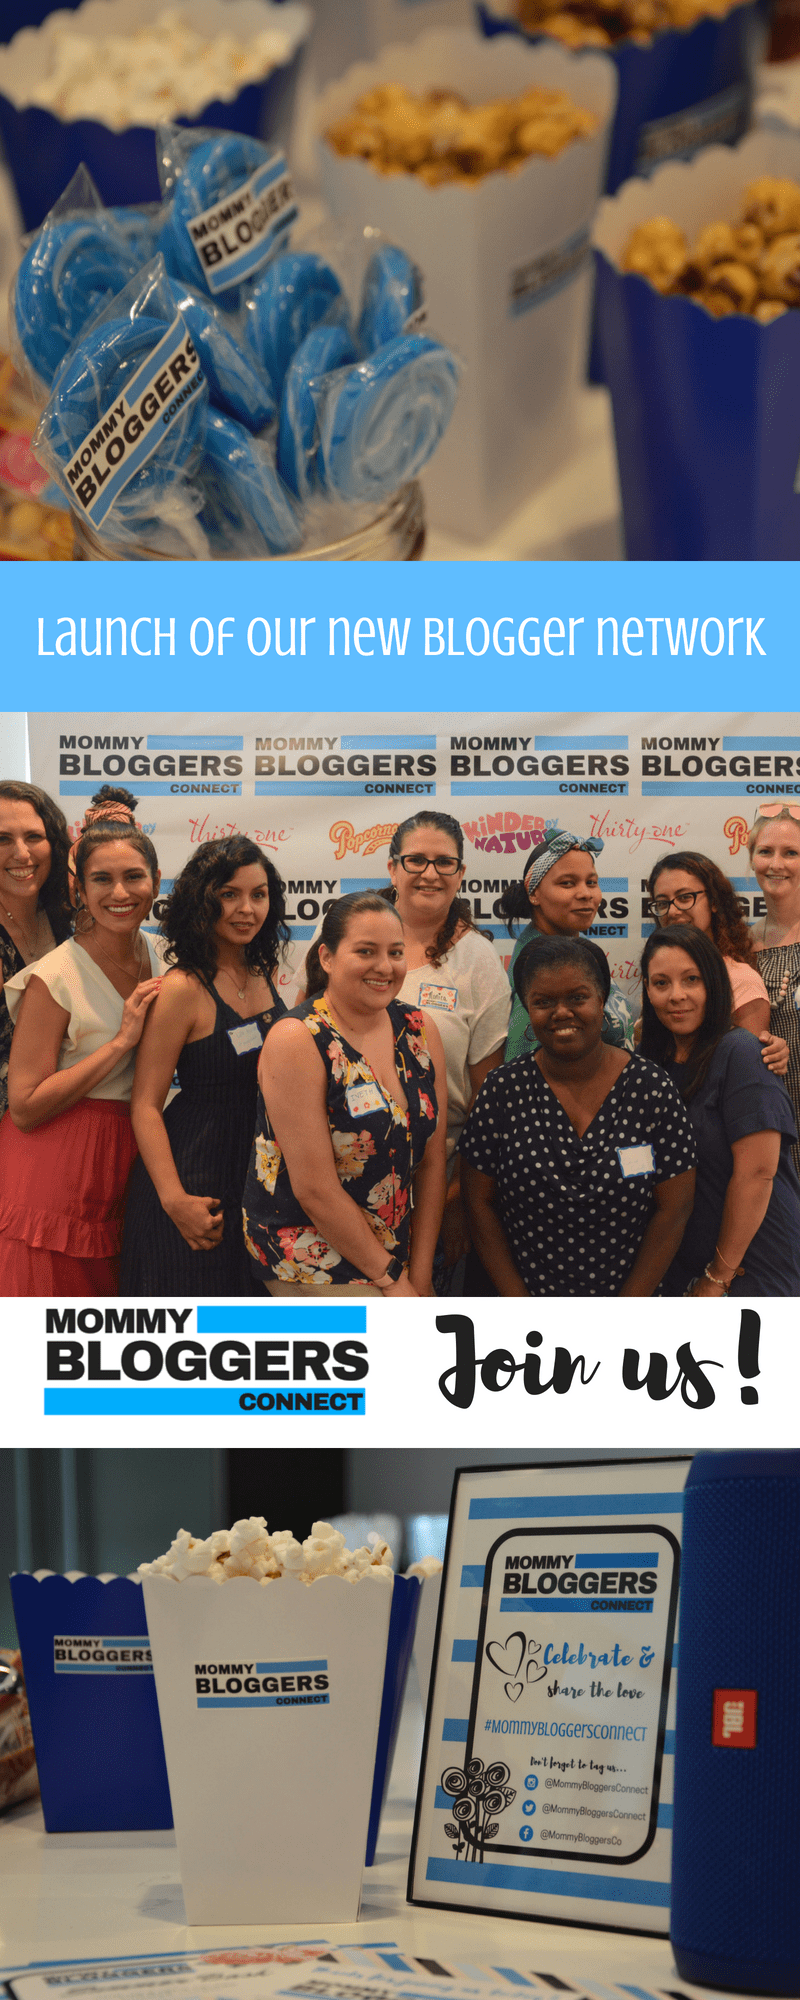 New BLOGGER NETWORK - Join us at Mommy Bloggers Connect - #MommyBloogesConnect #BloggerNetwork